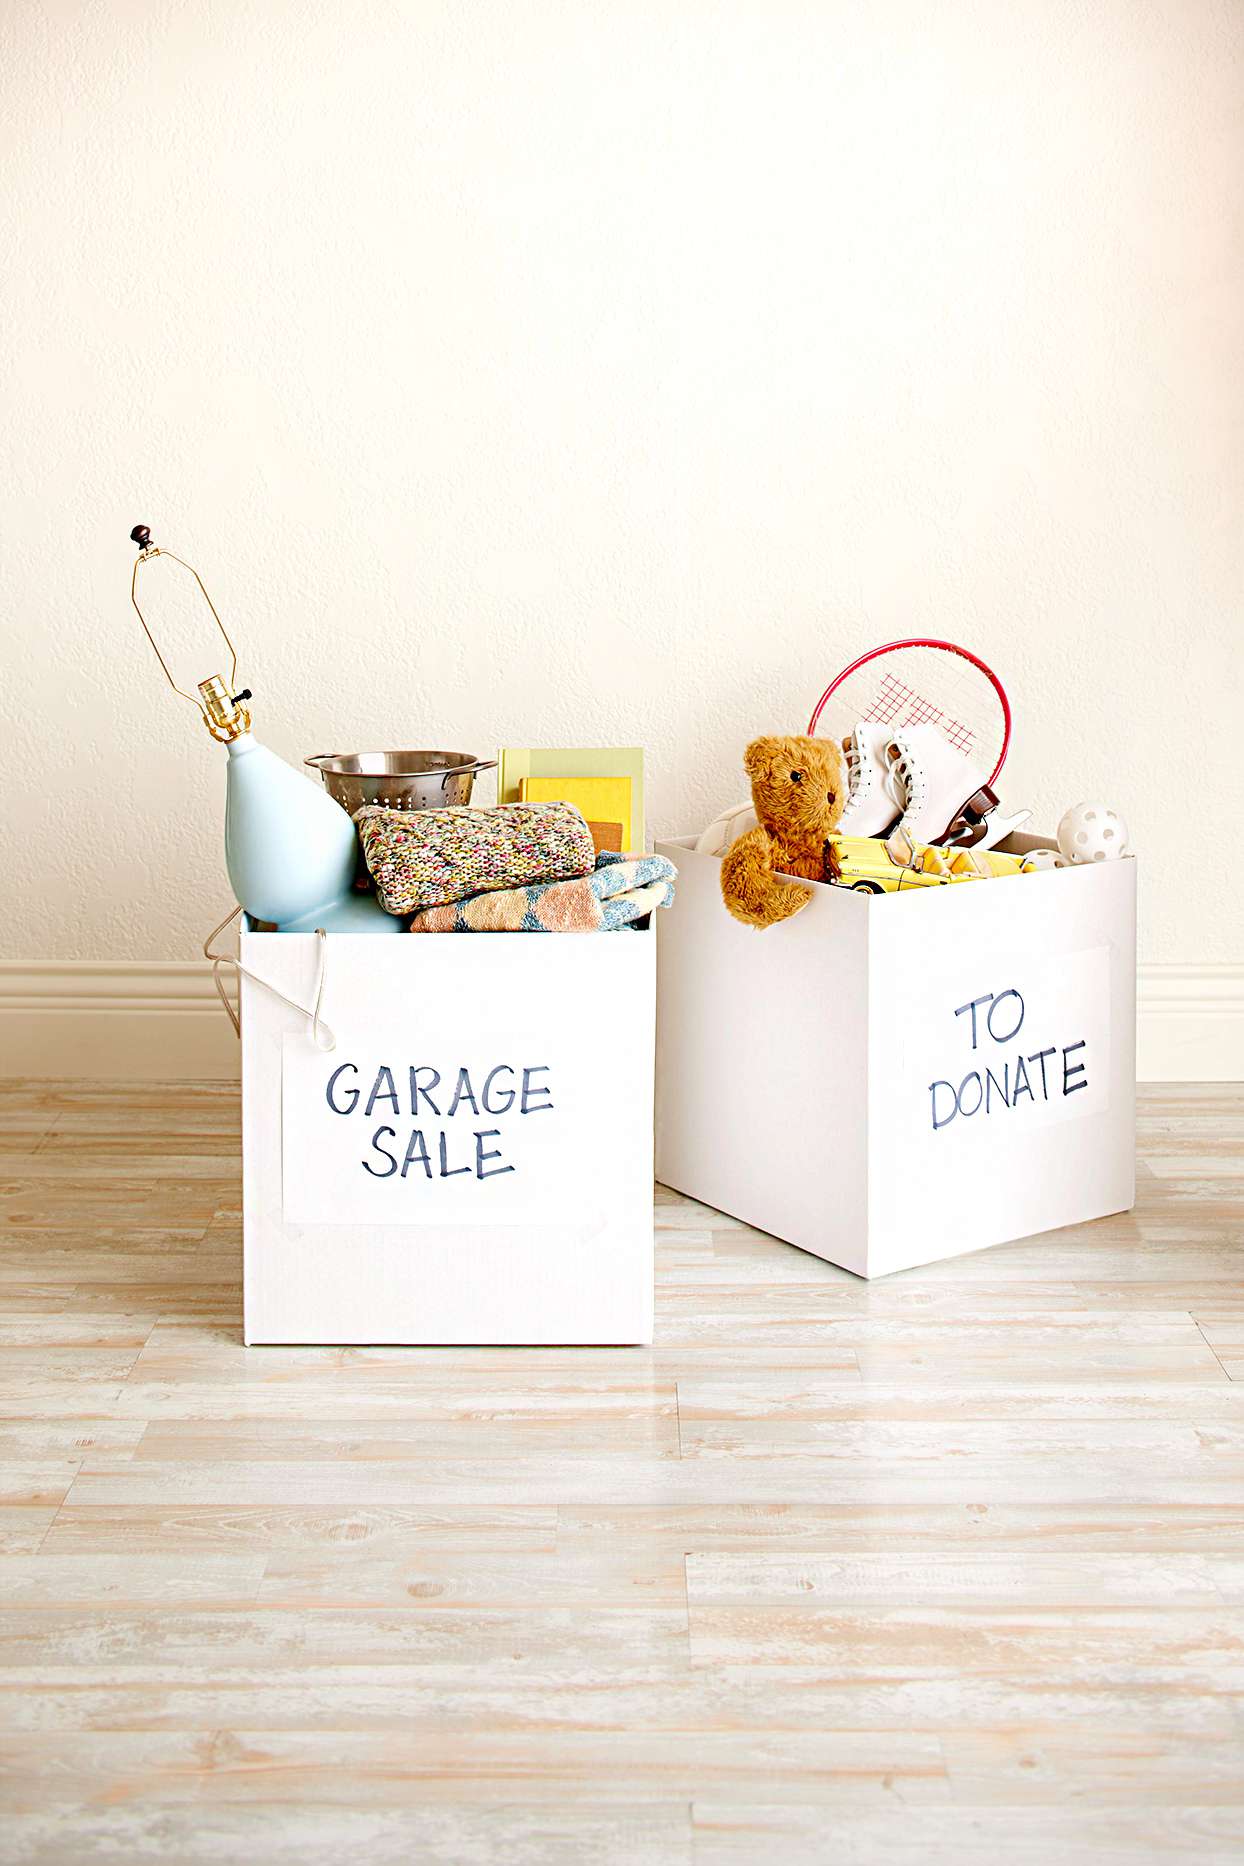 Bags with Garage Sale and To Donate items